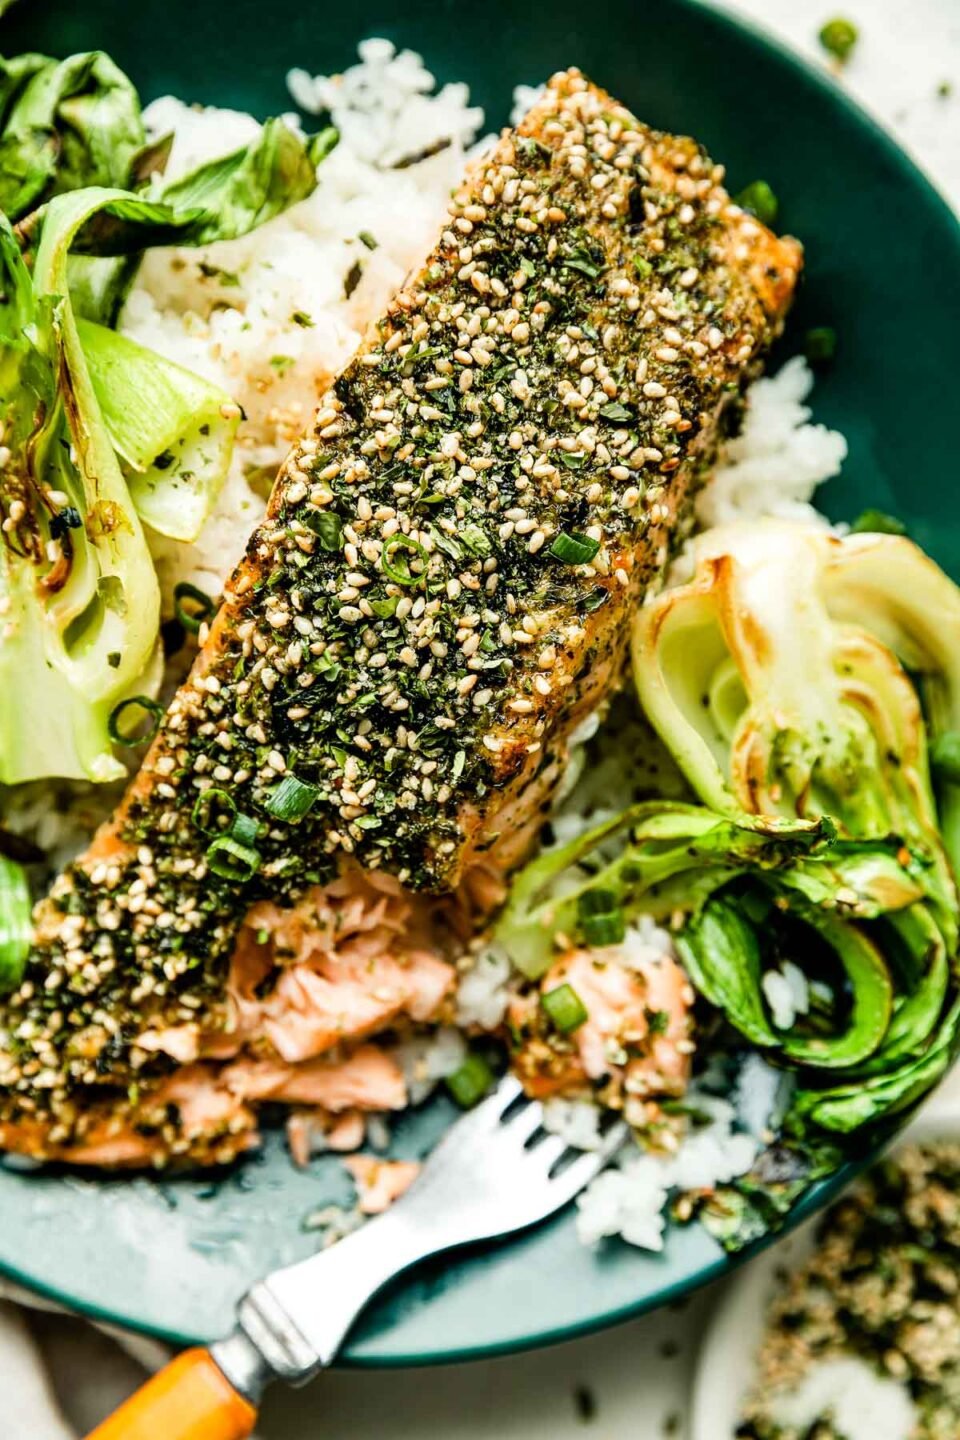 A close-up overhead macro shot of a partially eaten furikake salmon fillet on a green plate with bok choy, white rice & a wood-handled fork.